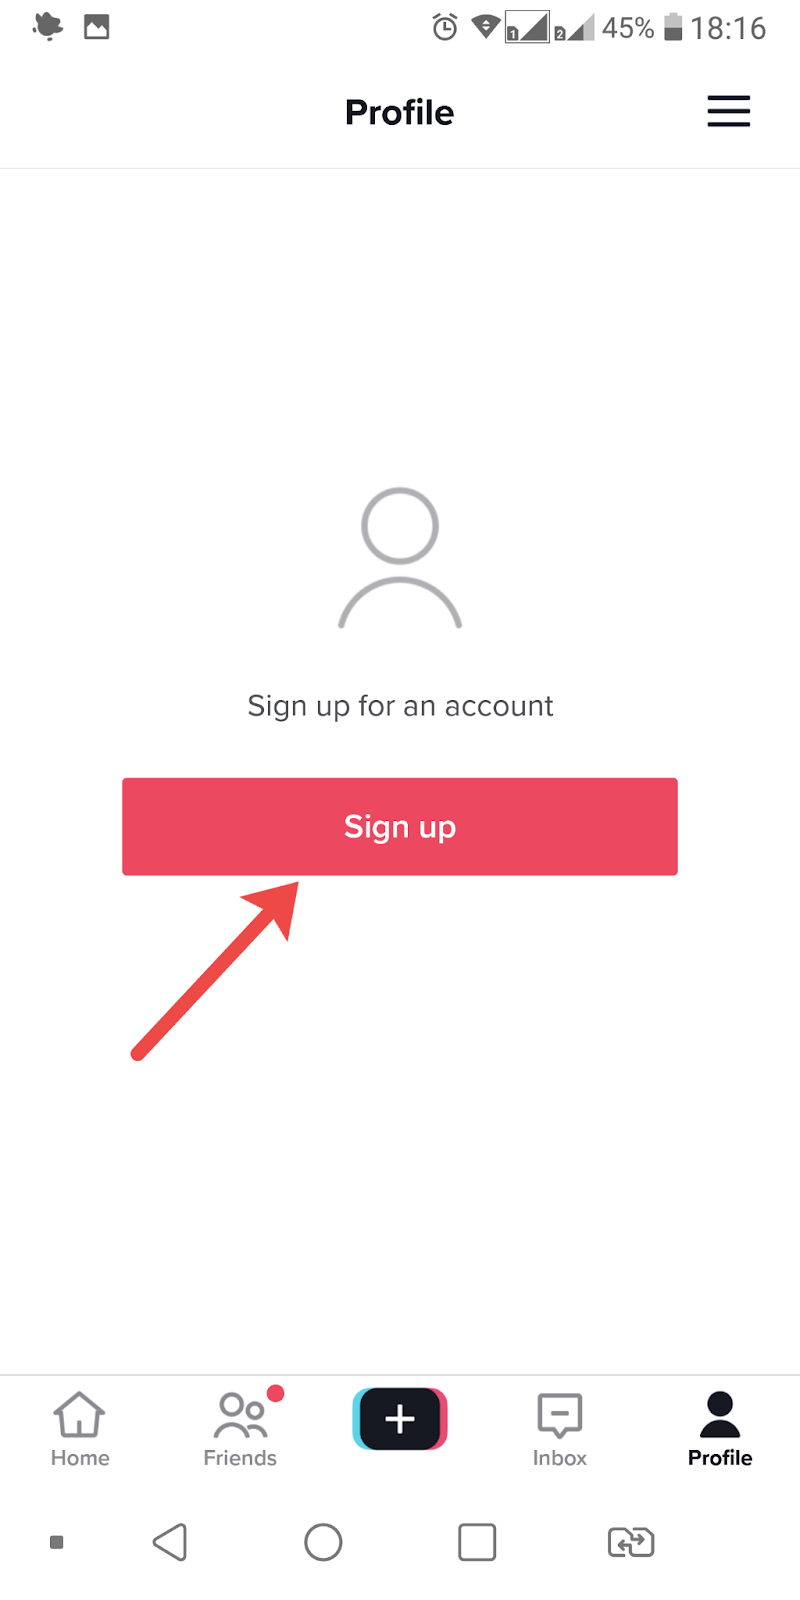 Select the Sign-up option